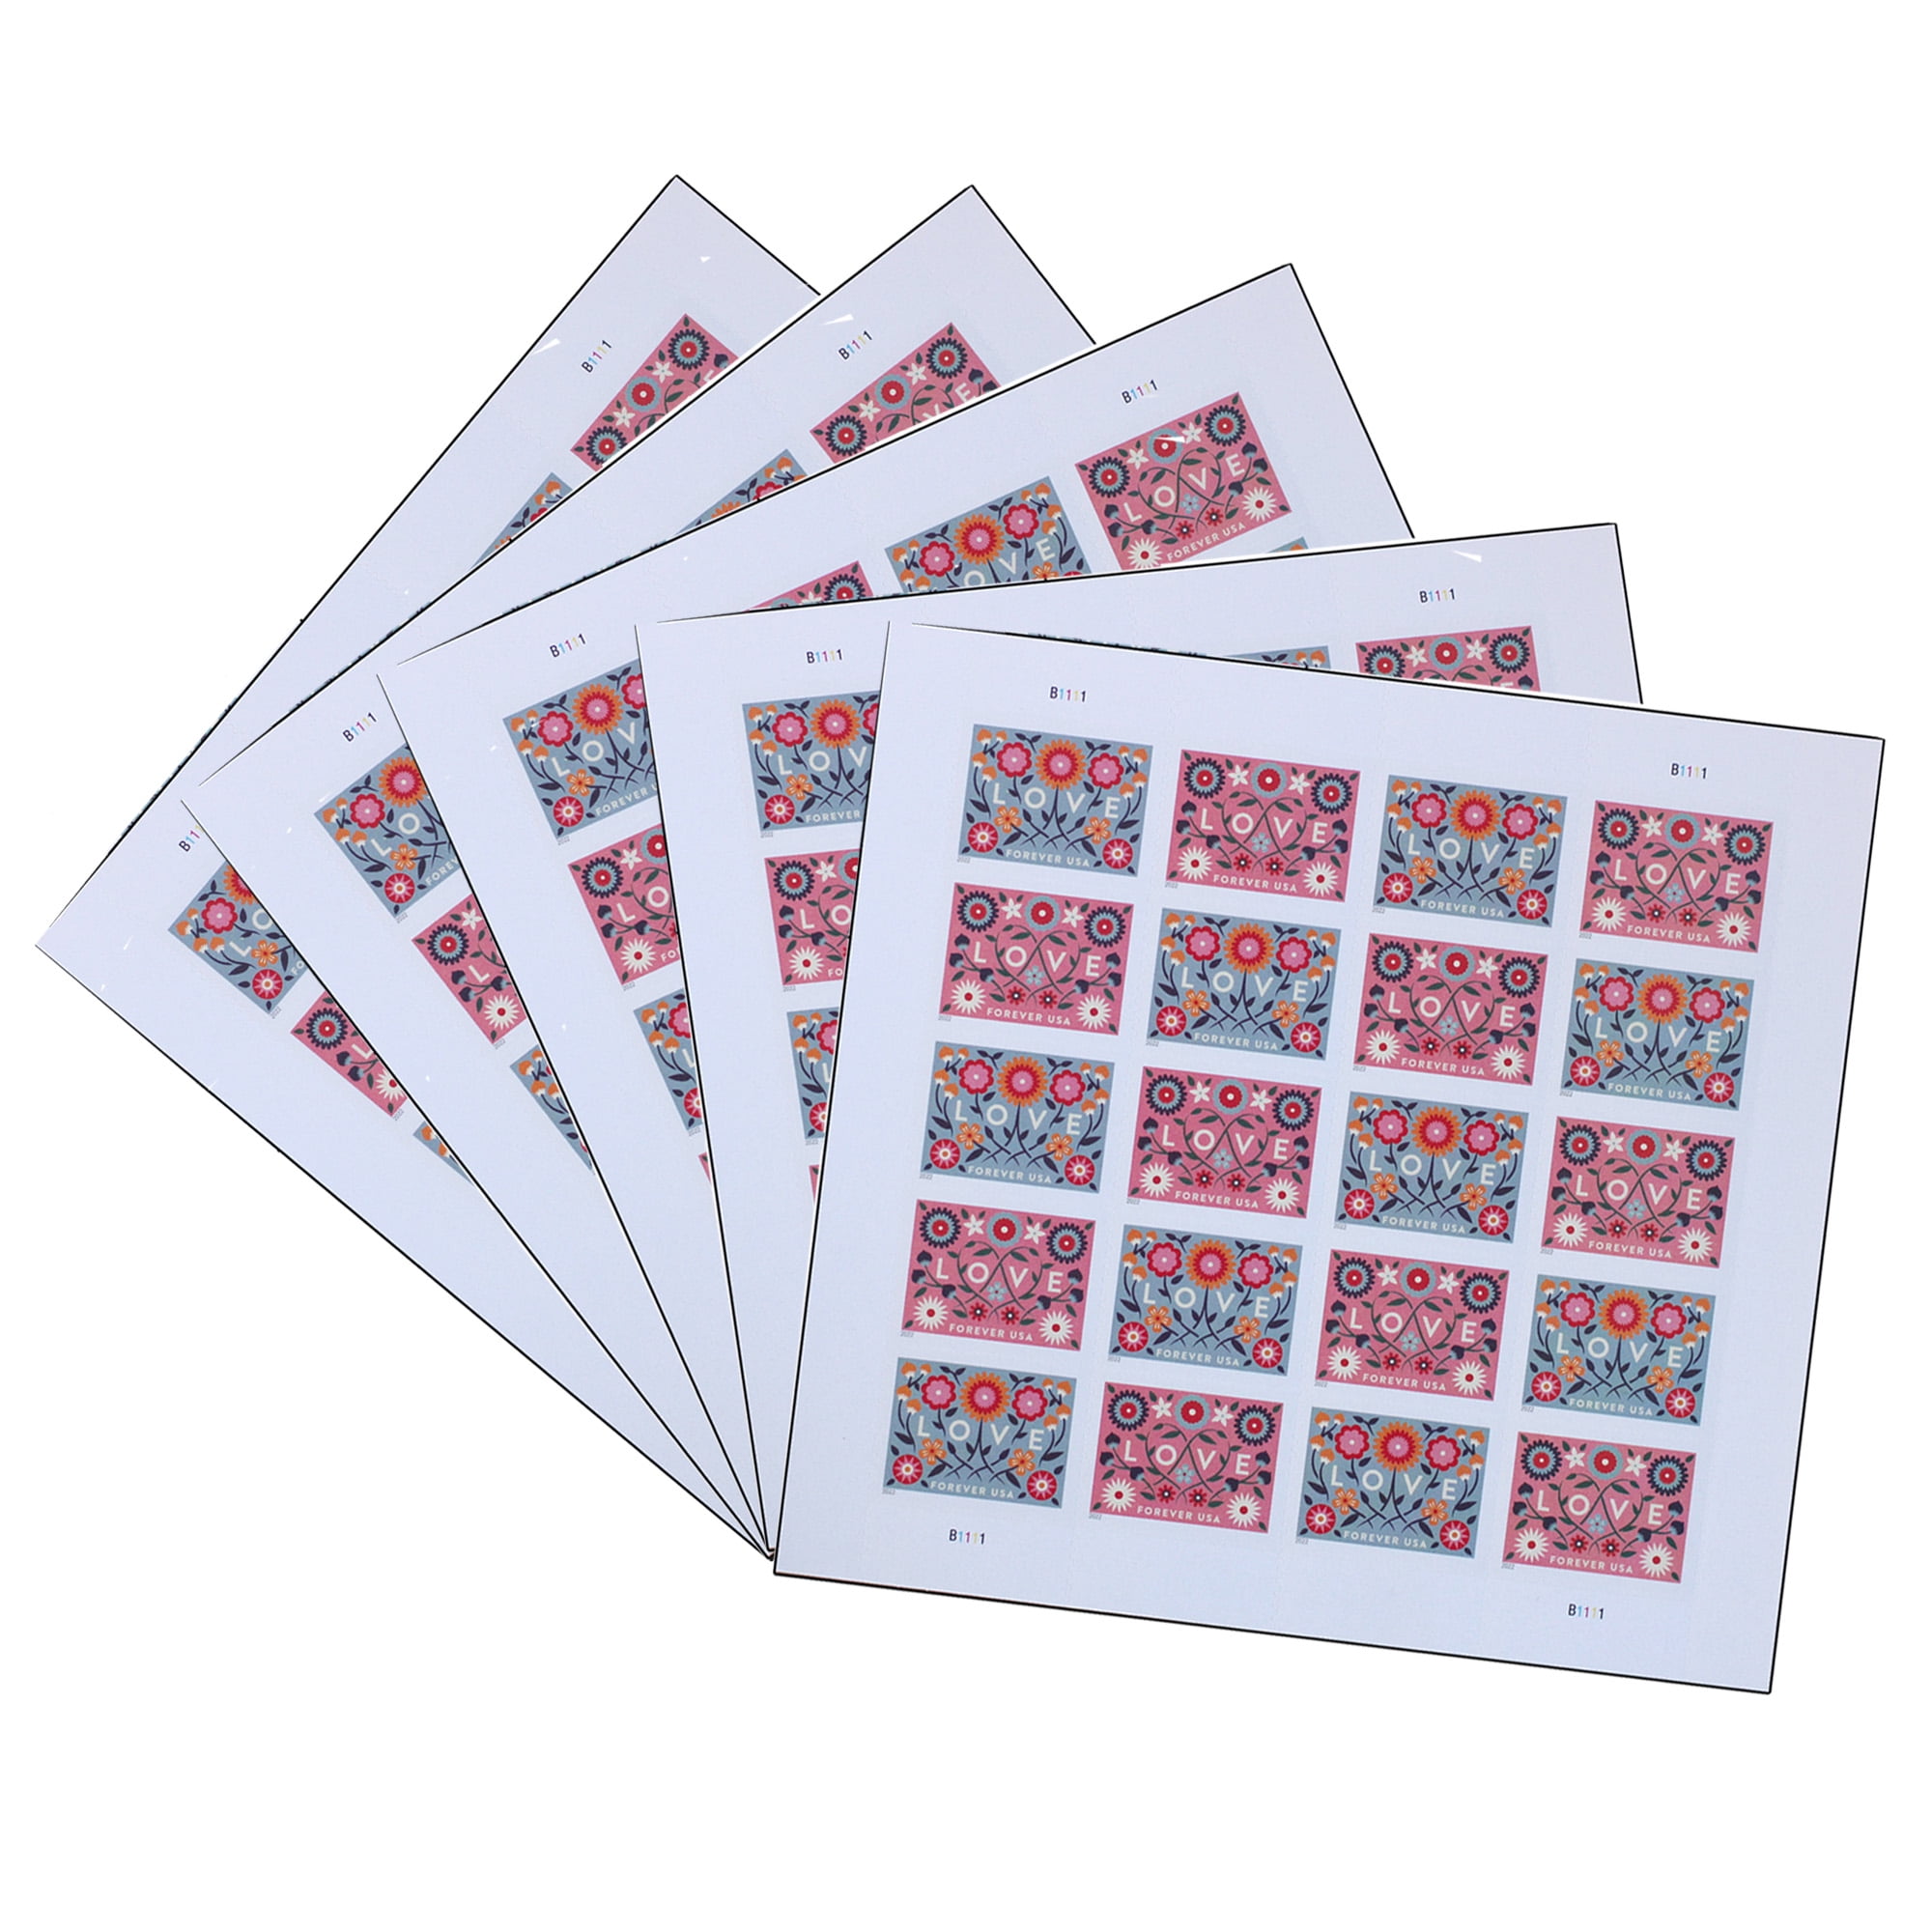 USPS Love Flourishes Forever Postage Stamps (Sheet of 20)